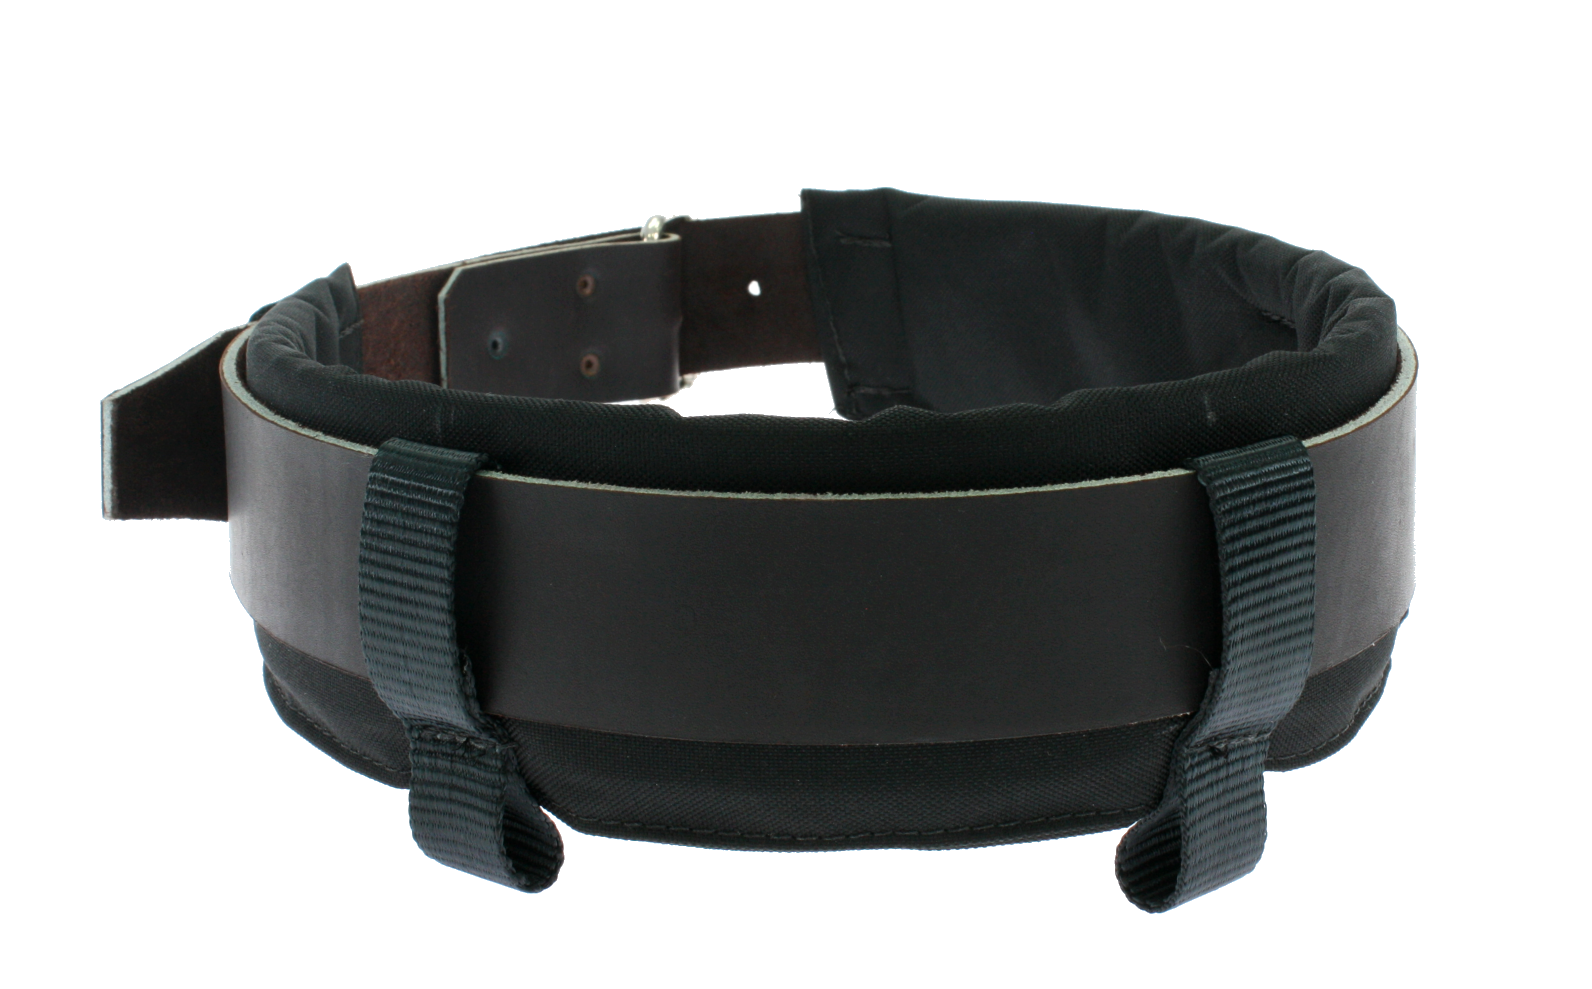 Riggers belt, leather and padded parts